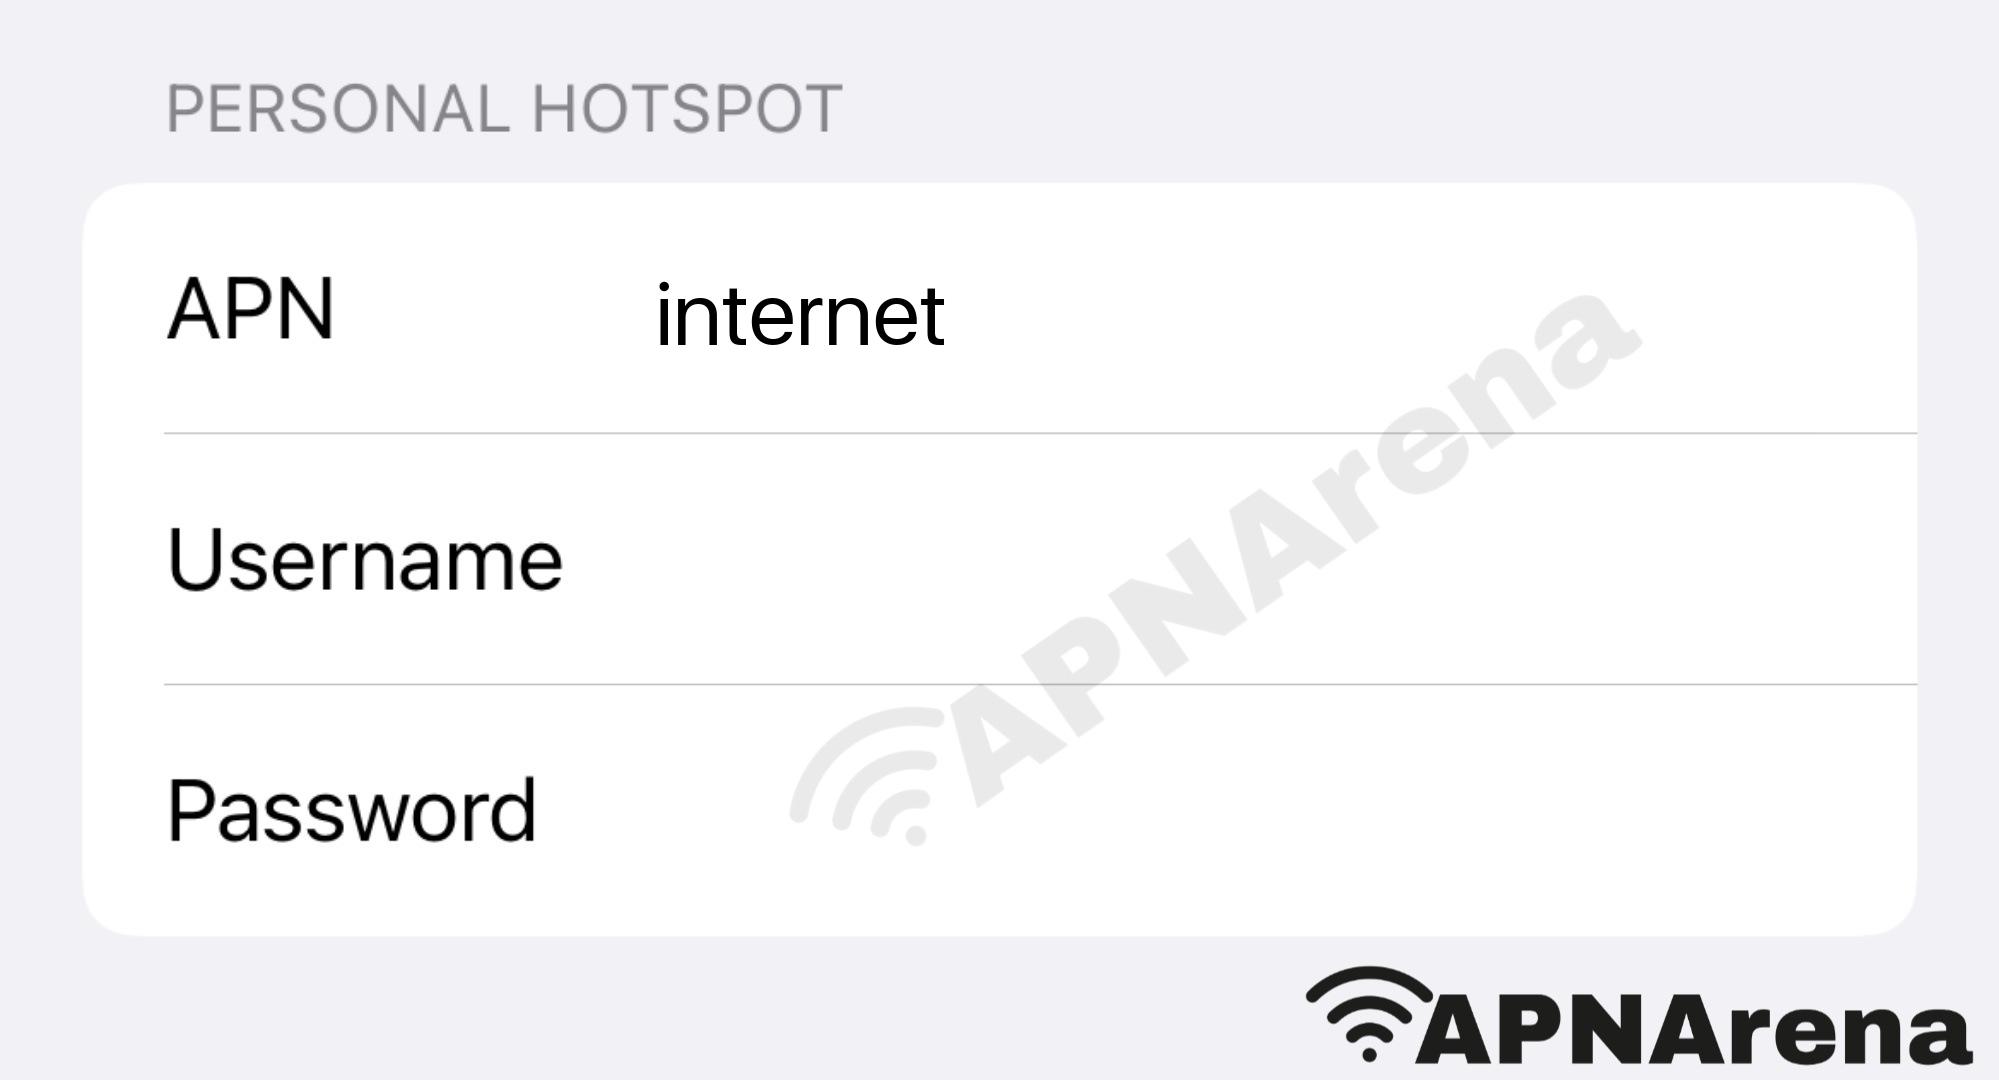 Virgin Mobile South Africa Personal Hotspot Settings for iPhone